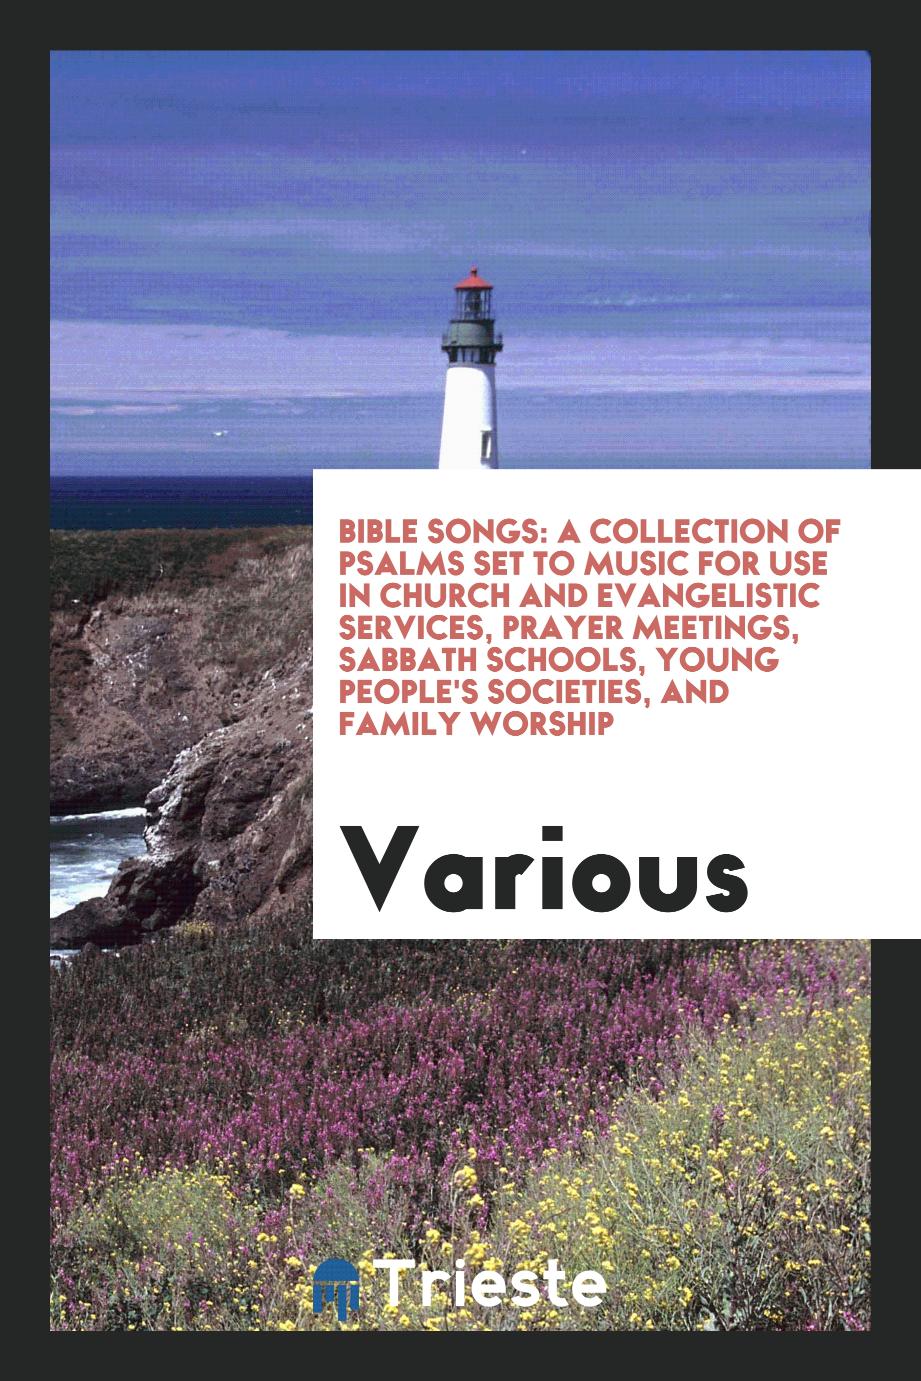 Bible Songs: A Collection of Psalms Set to Music for Use in Church and Evangelistic Services, Prayer Meetings, Sabbath Schools, Young People's Societies, and Family Worship